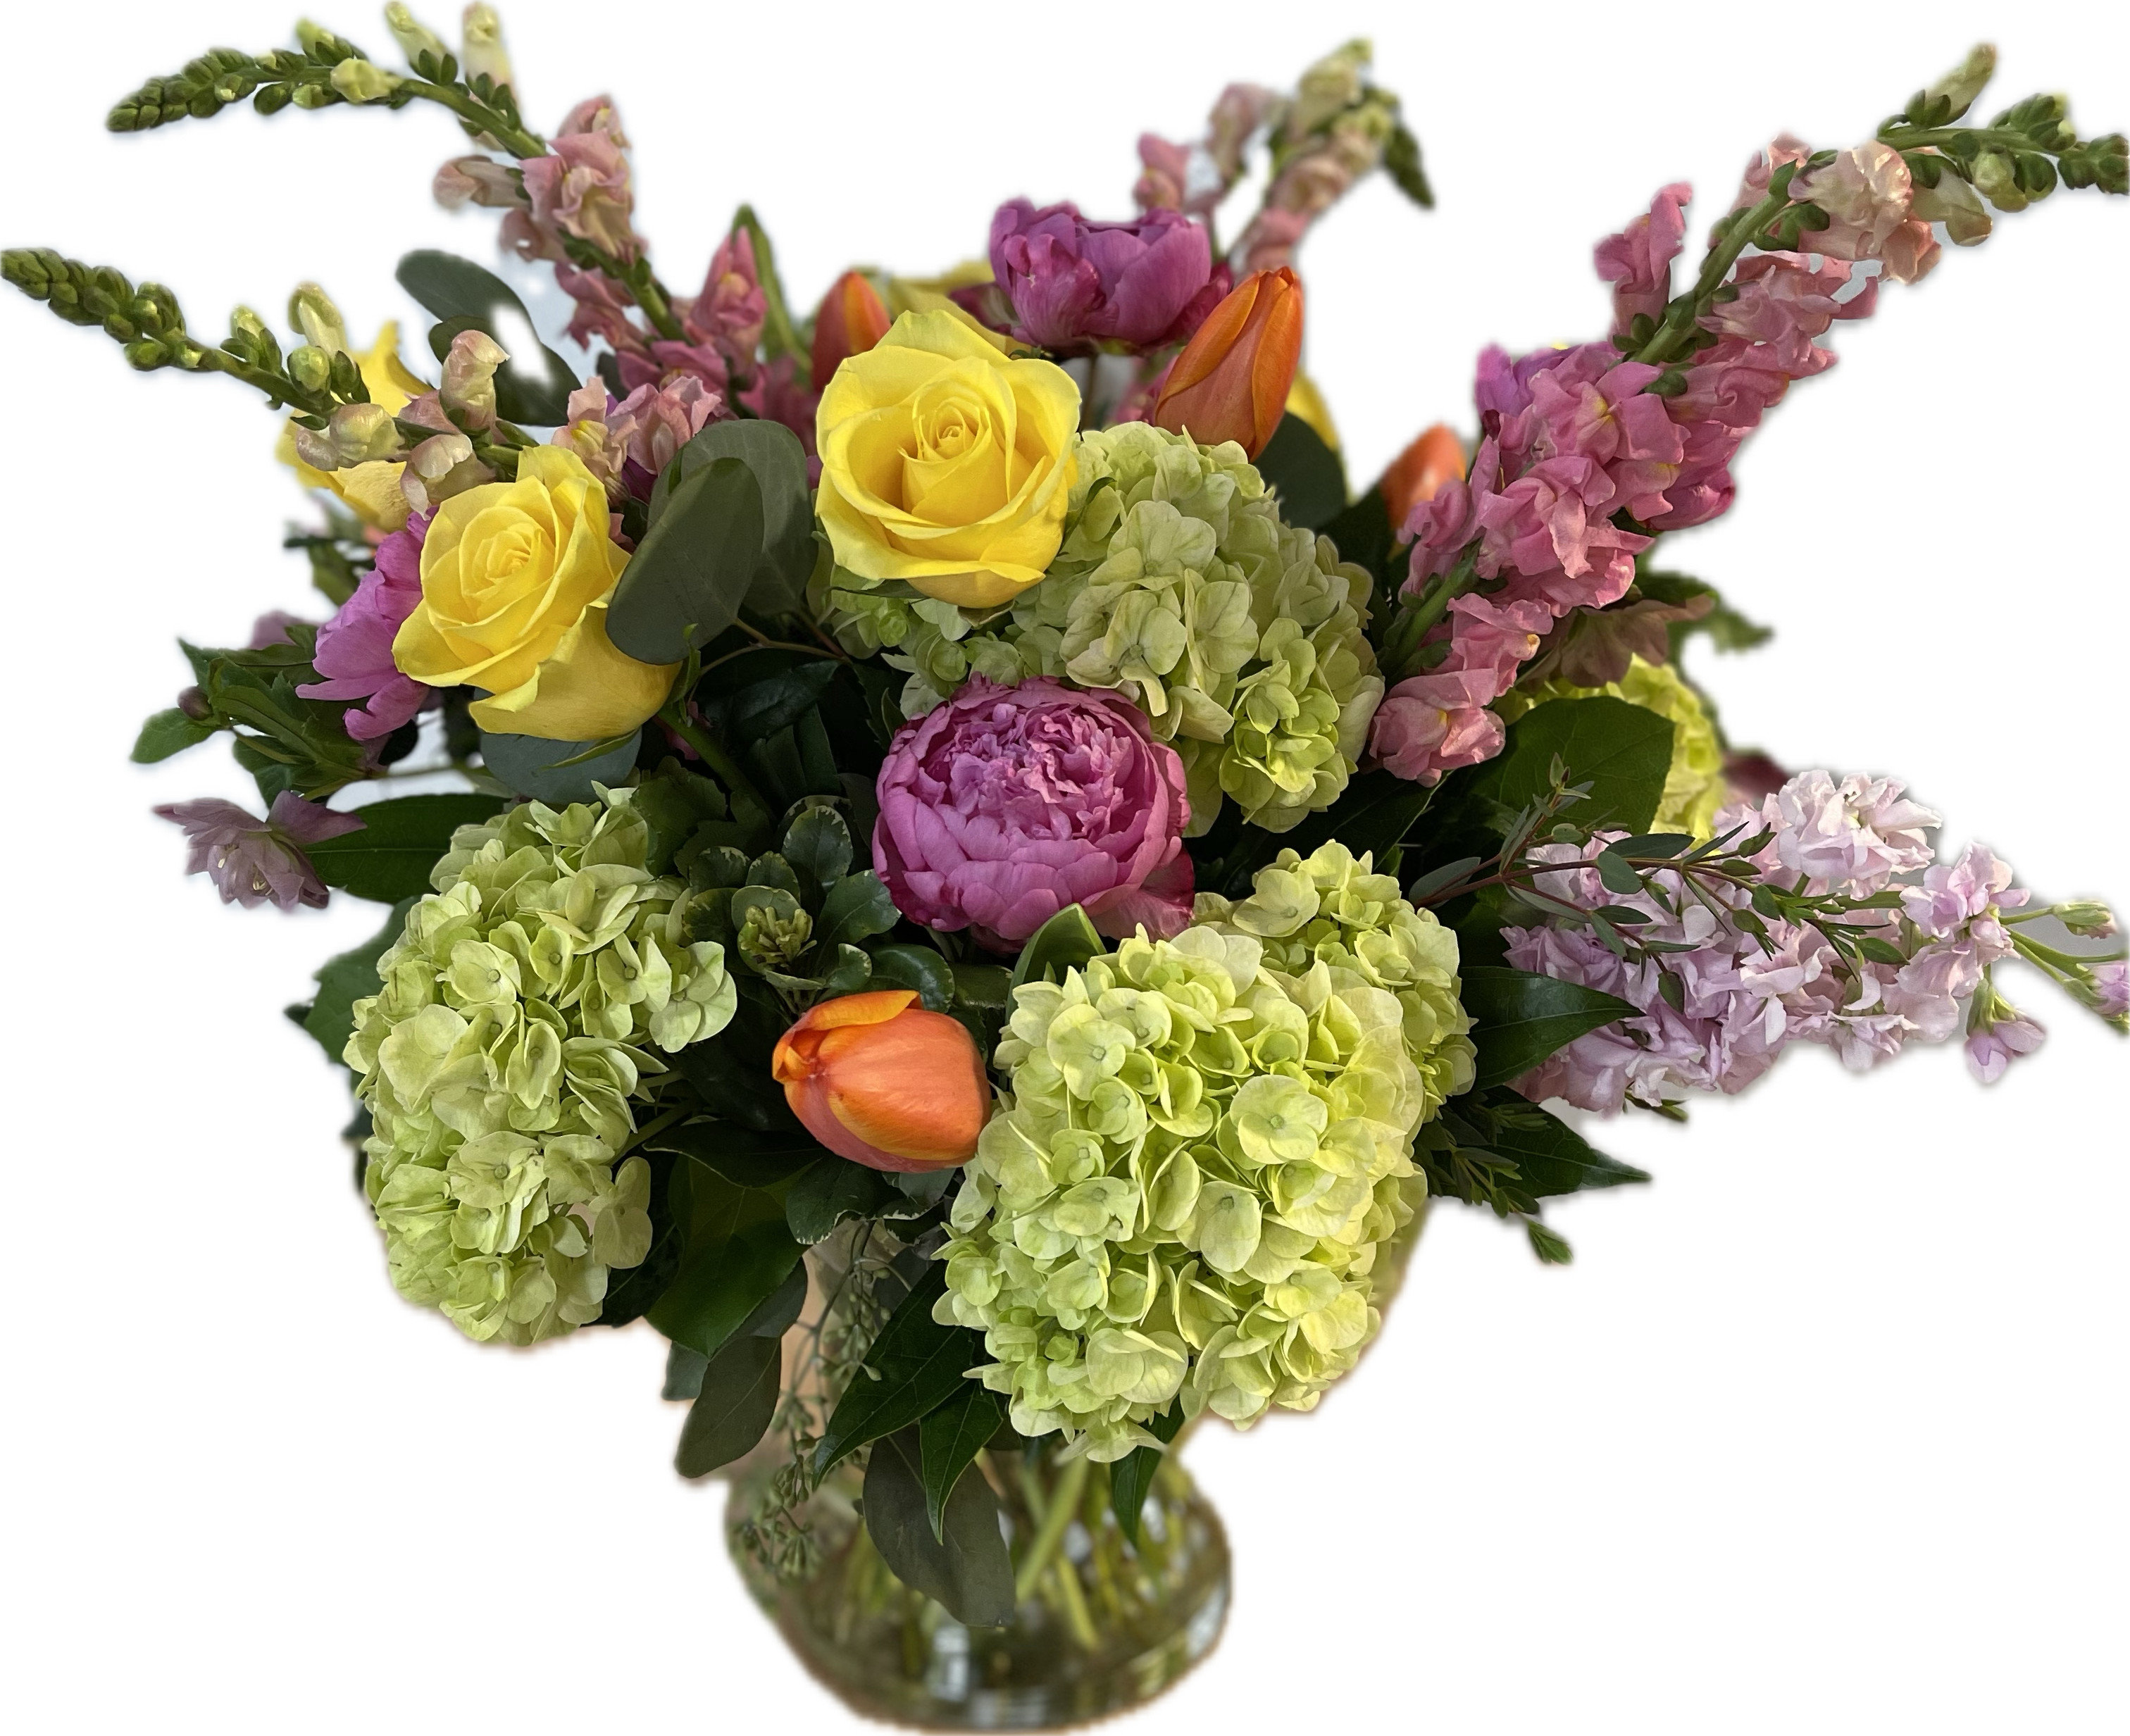 Spring Fling!! - Stunning spring mix  arrangement of hydrangea, peonies, roses, tulips, snaps, stock....sure to bring a smile to that special someone